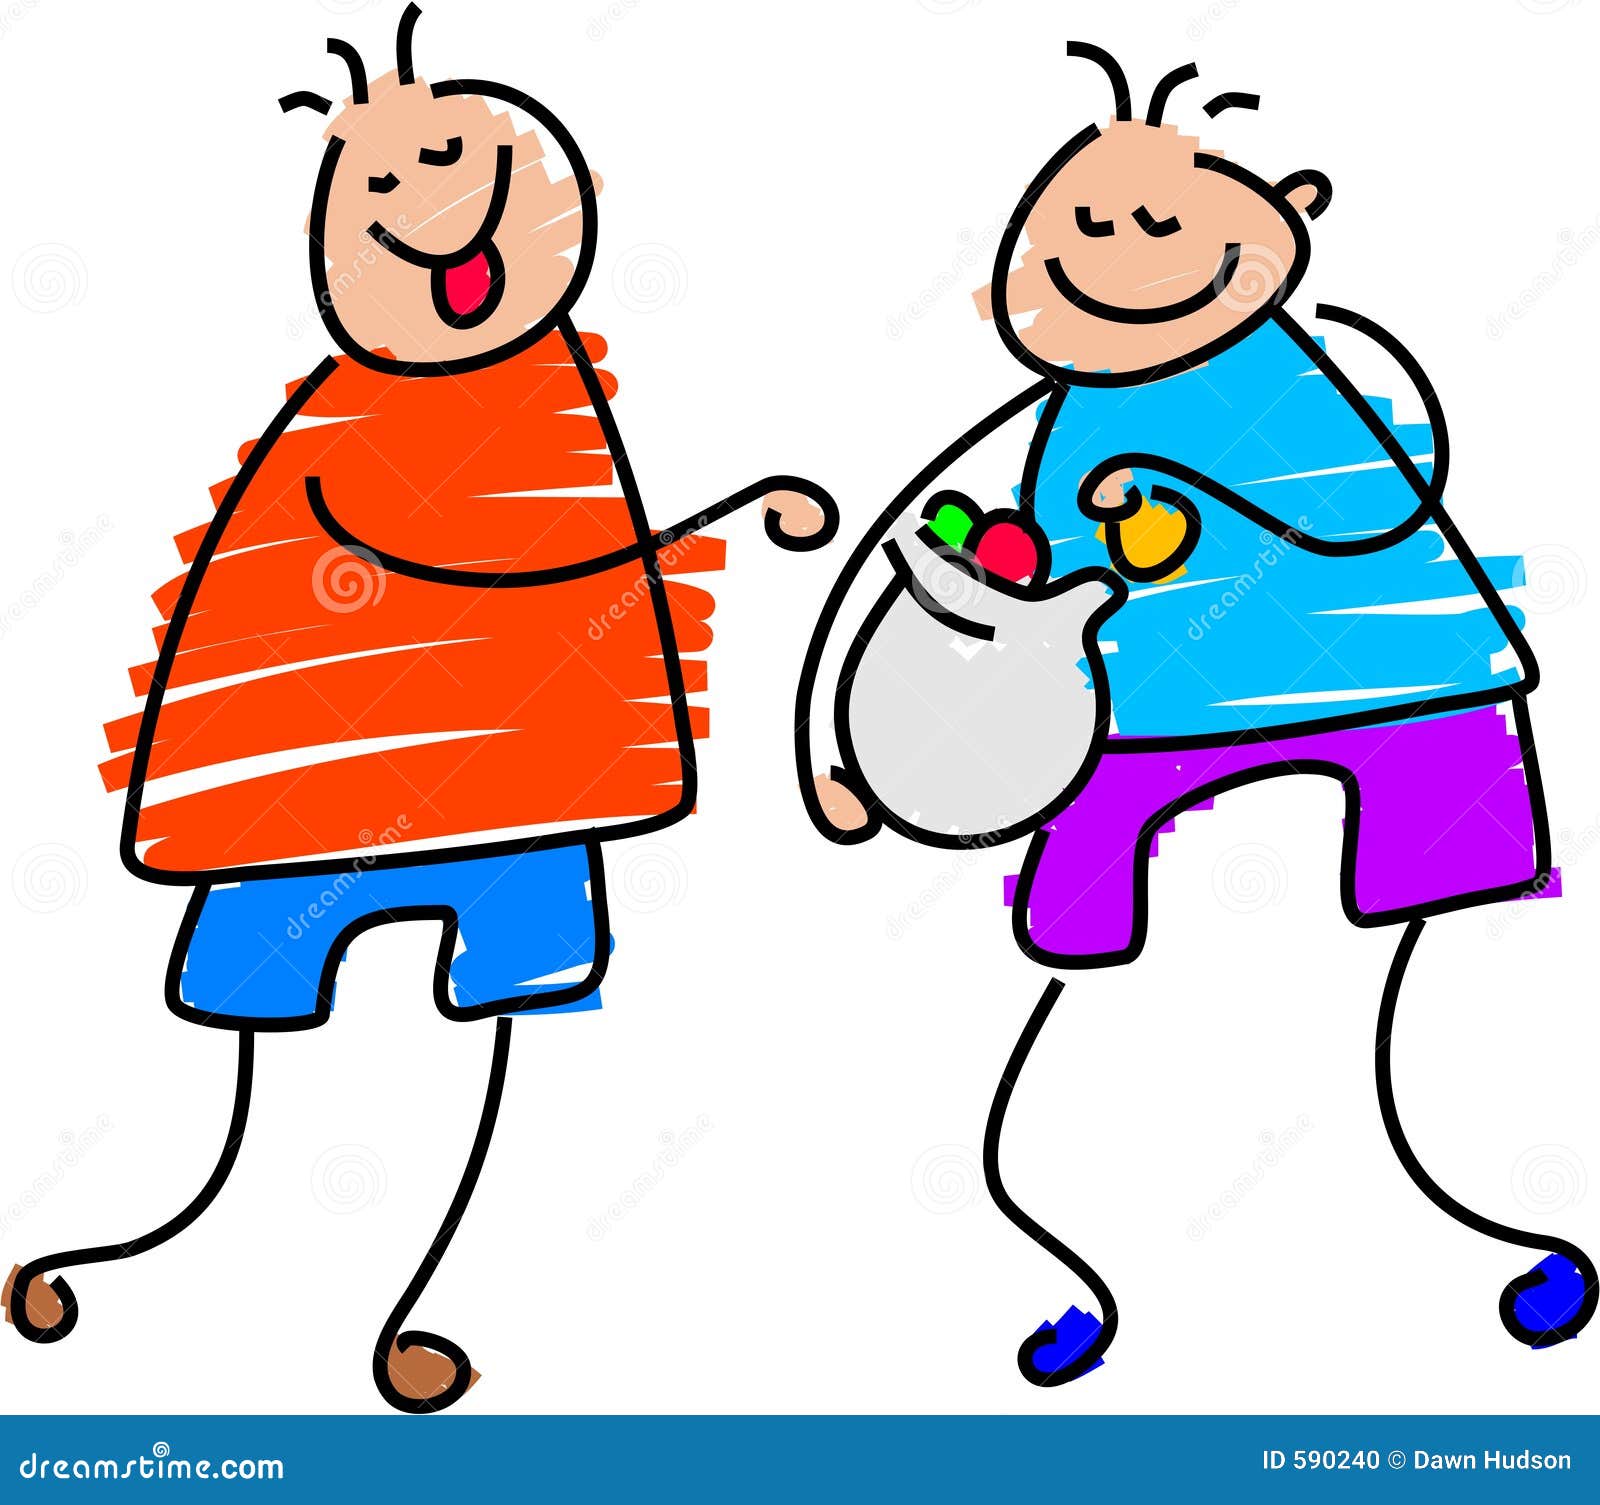 clipart on sharing - photo #11